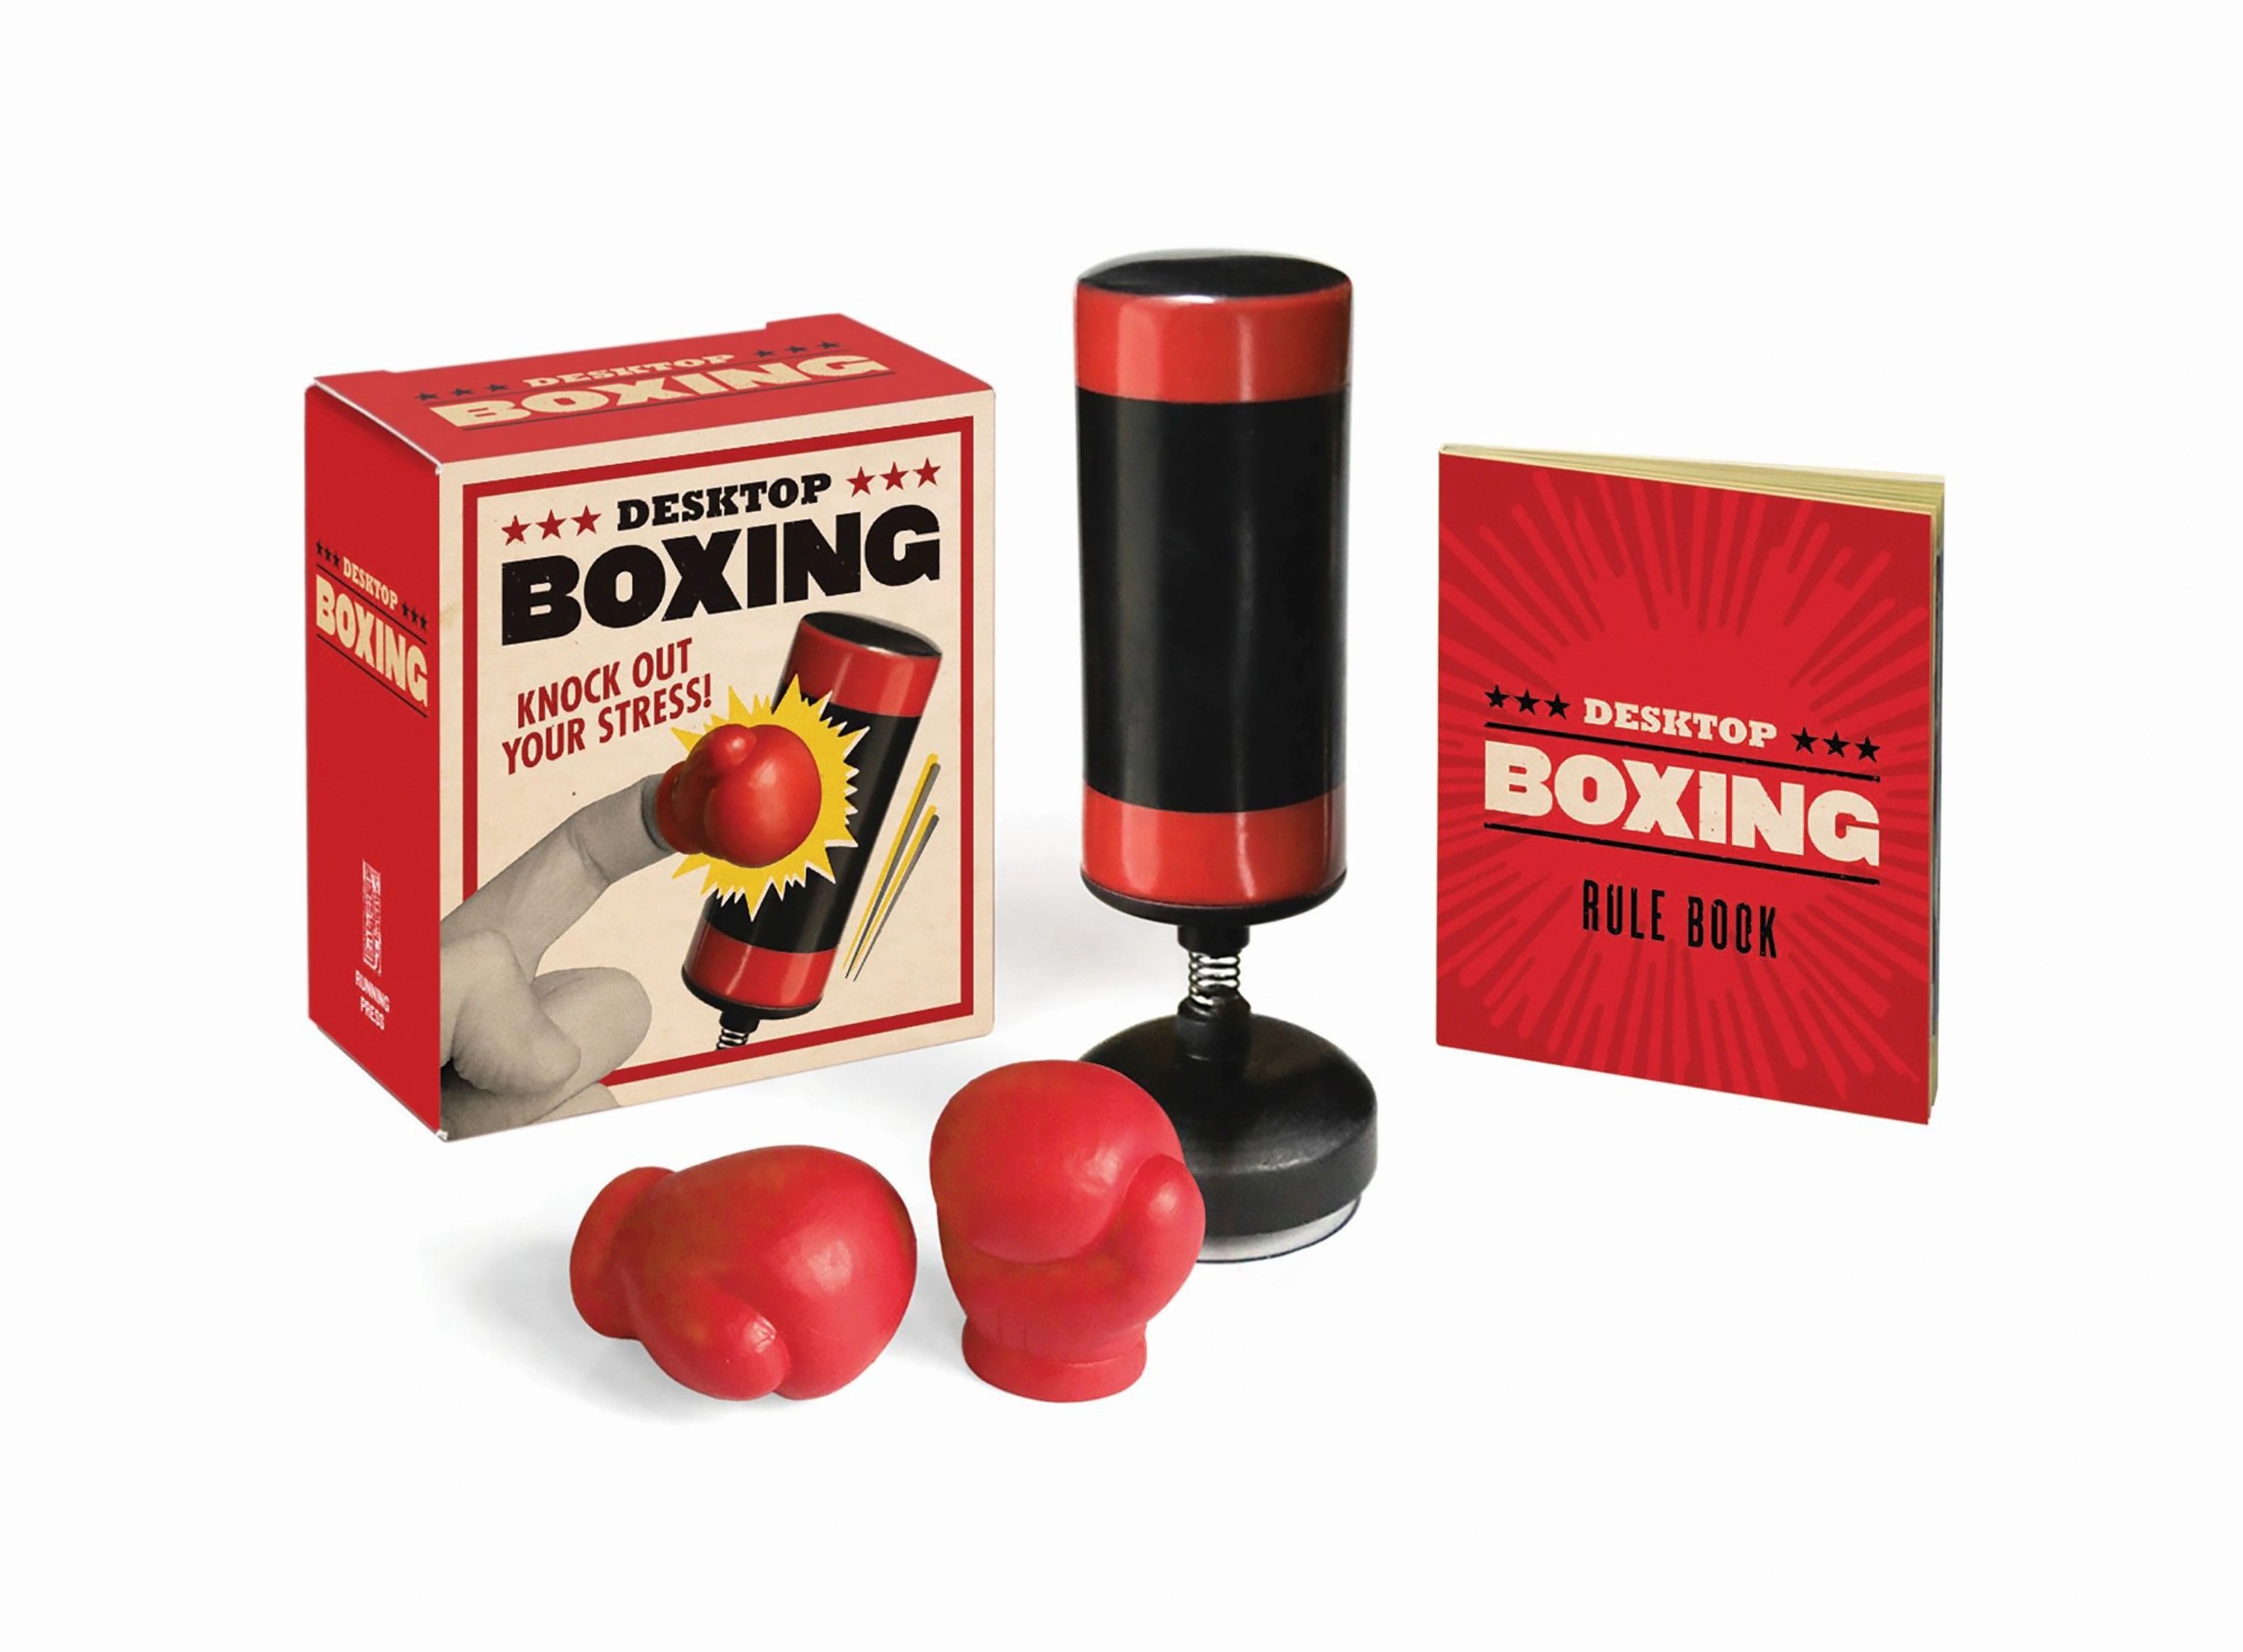 the mini boxing kit in front of a plain background